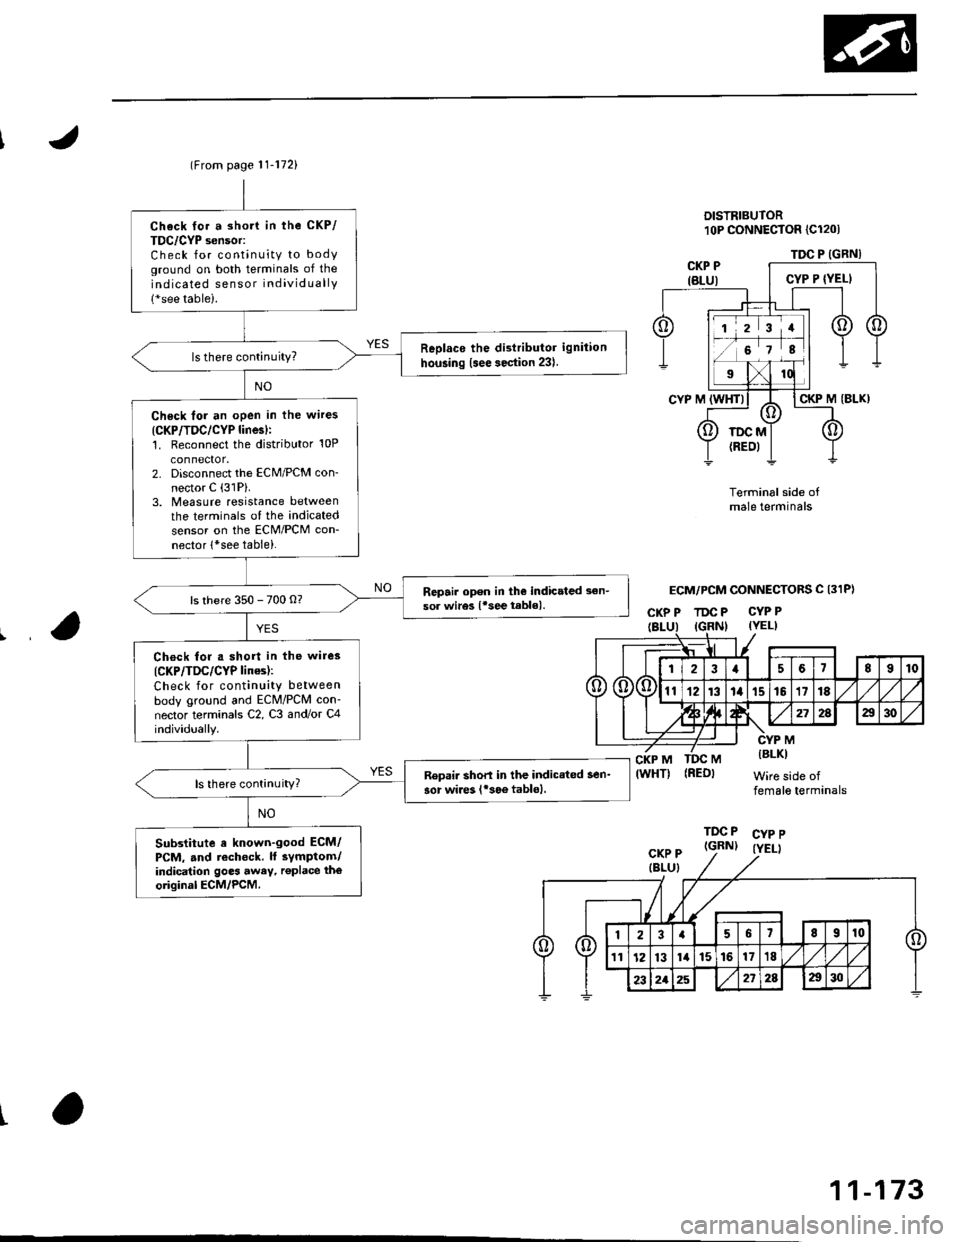 HONDA CIVIC 1997 6.G User Guide (From page | 1-172)
Check fo. a sho.t in the CKP/
TDC/CYP sensor:Check for continuity to bodYground on both terminals of the
indicated senso r individually
1*see table).
Replaco the di3tributor igniti